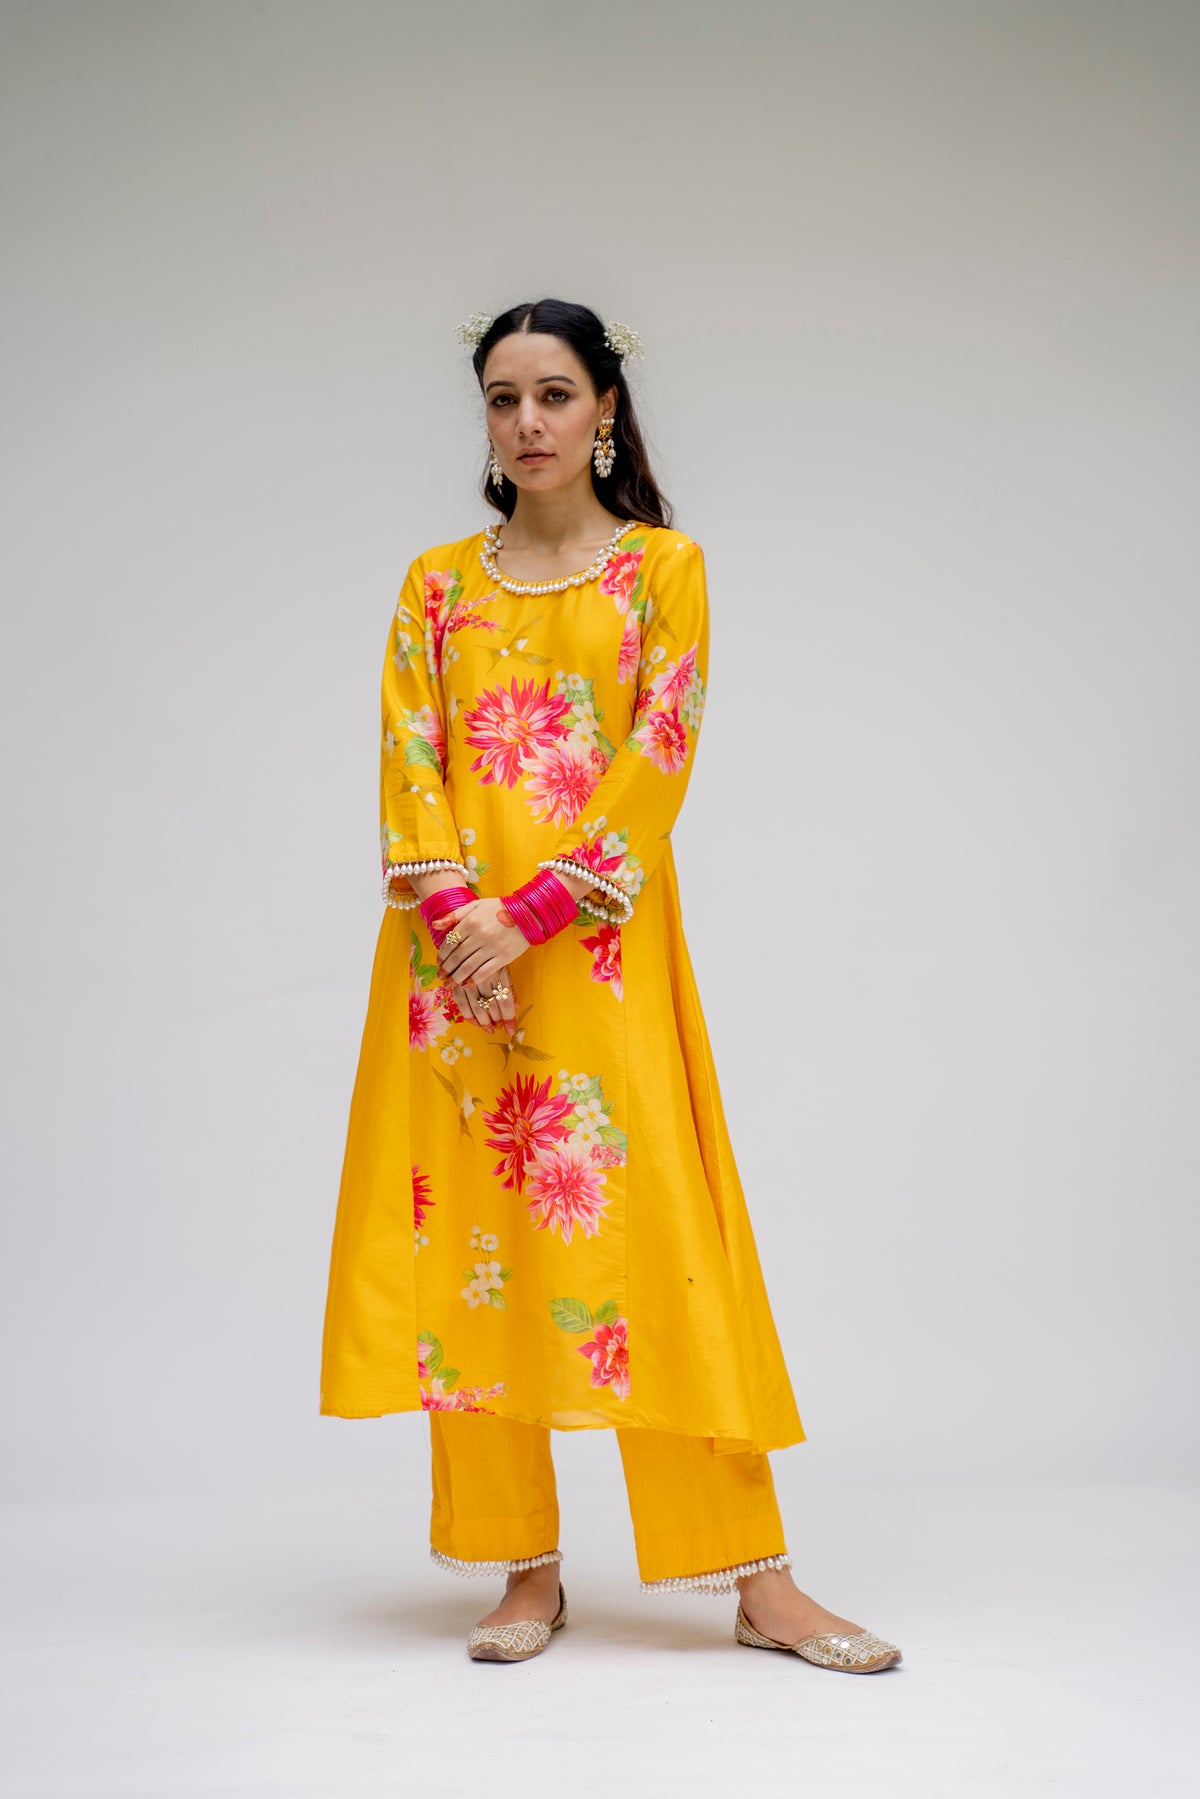 Baagh- Yellow Printed Side Panel Suit - Set of 3